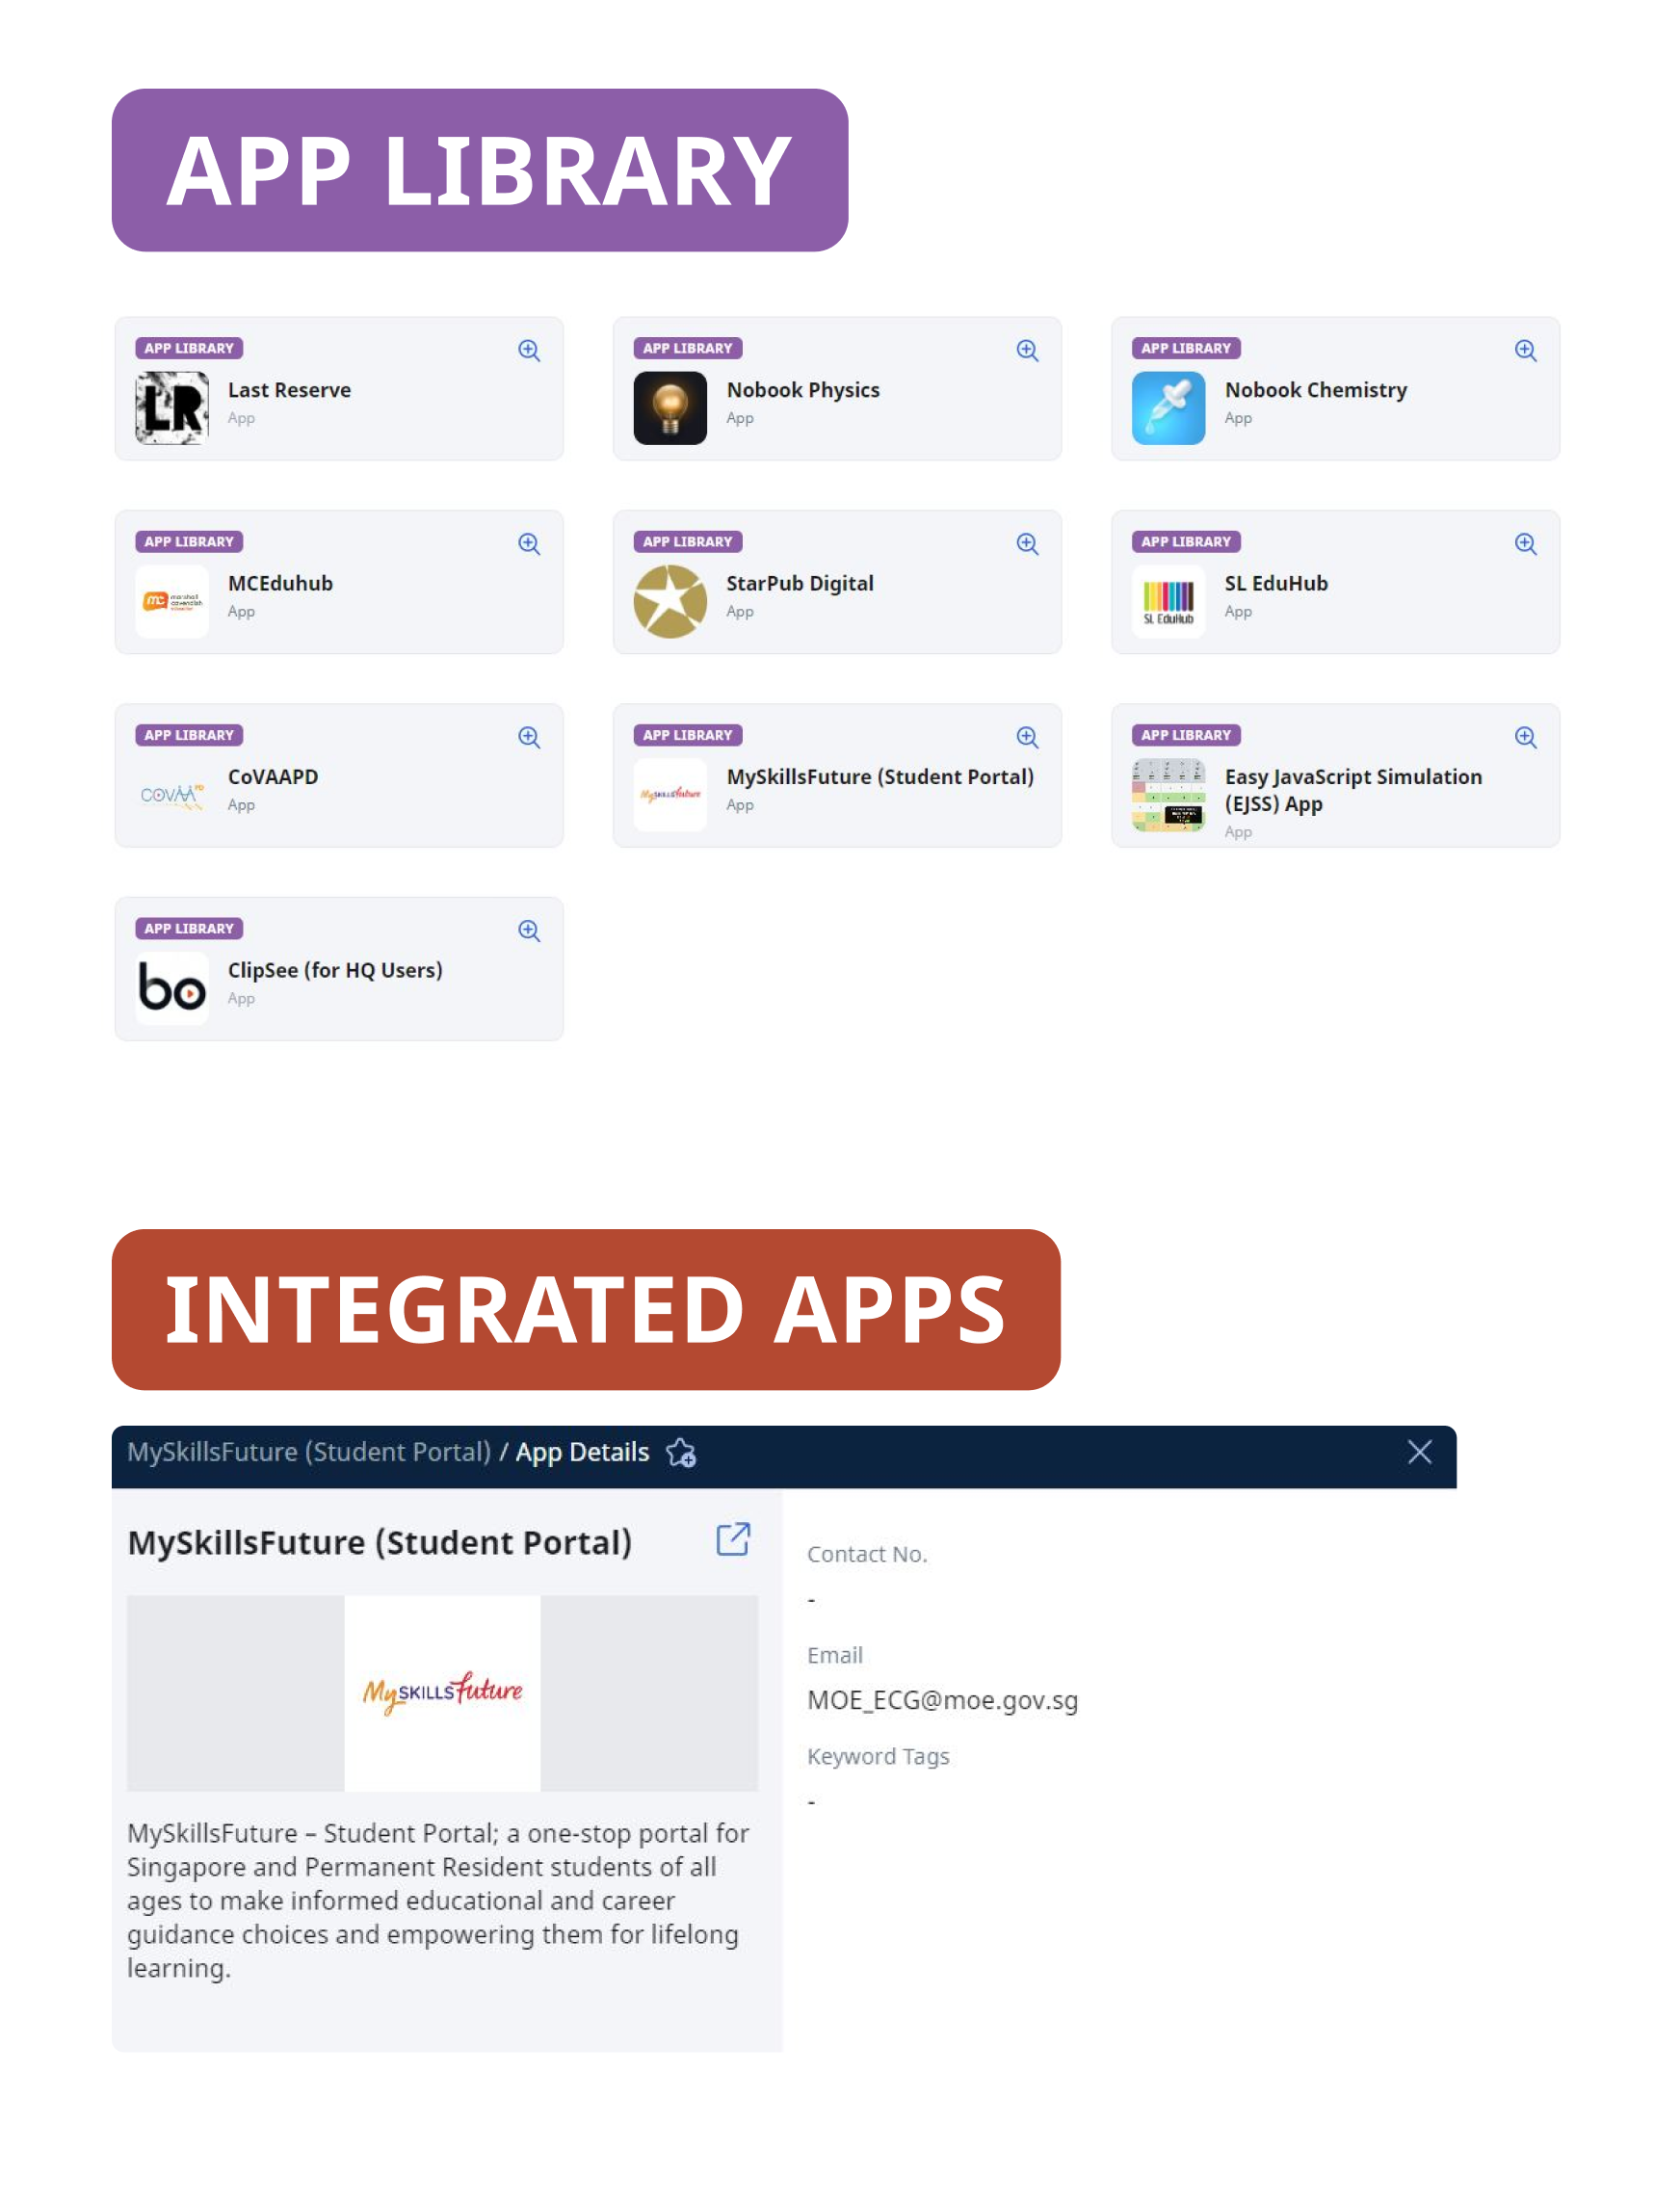 Integrated apps